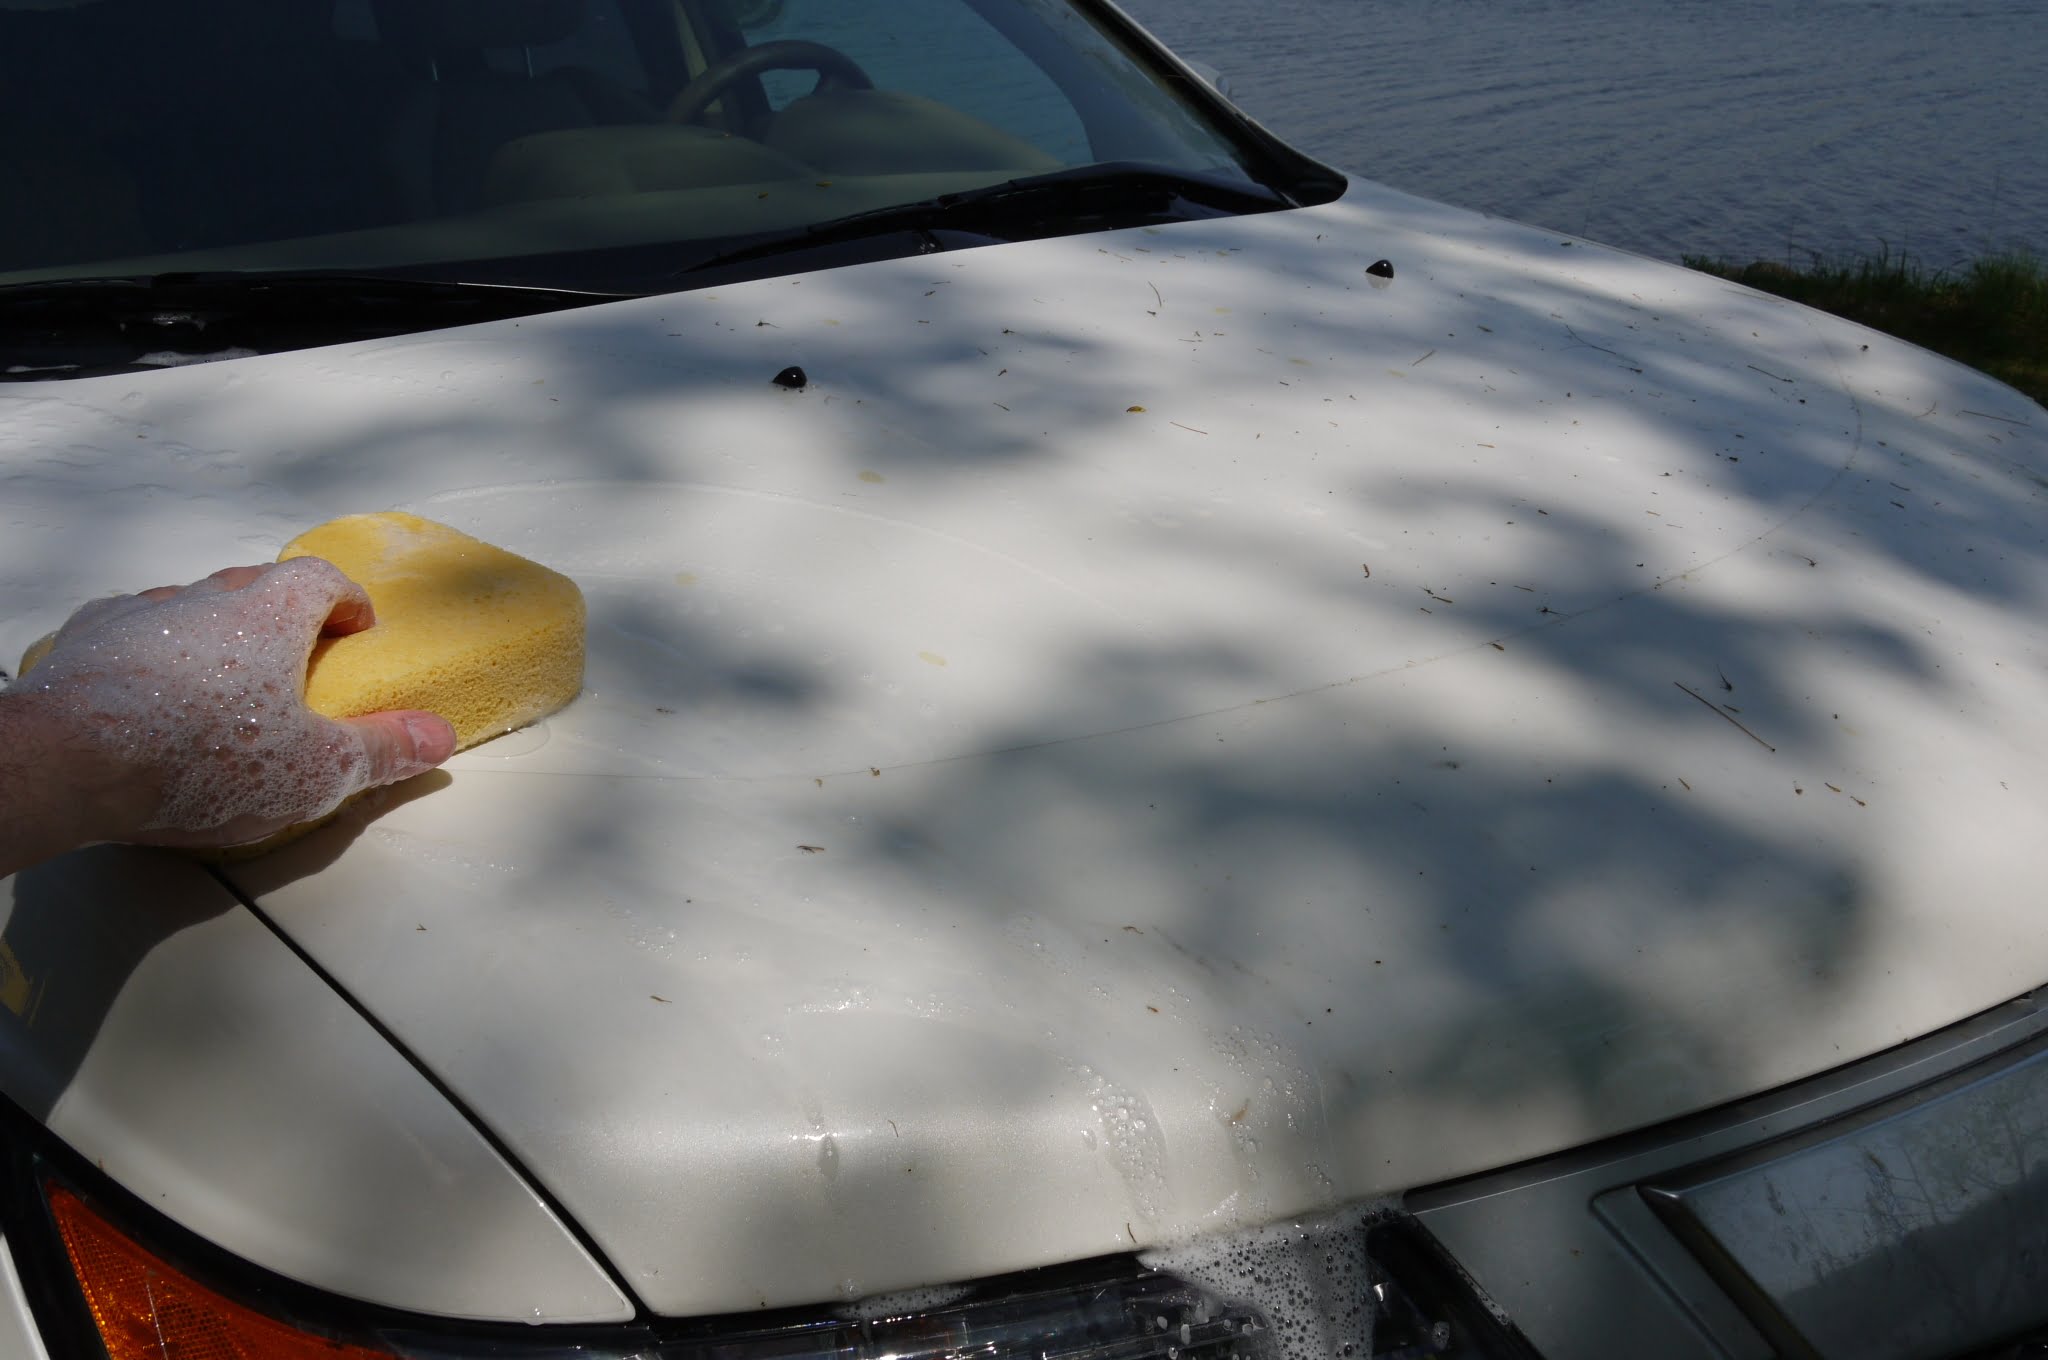 How to: Get Rid of Tree Sap on Your Car